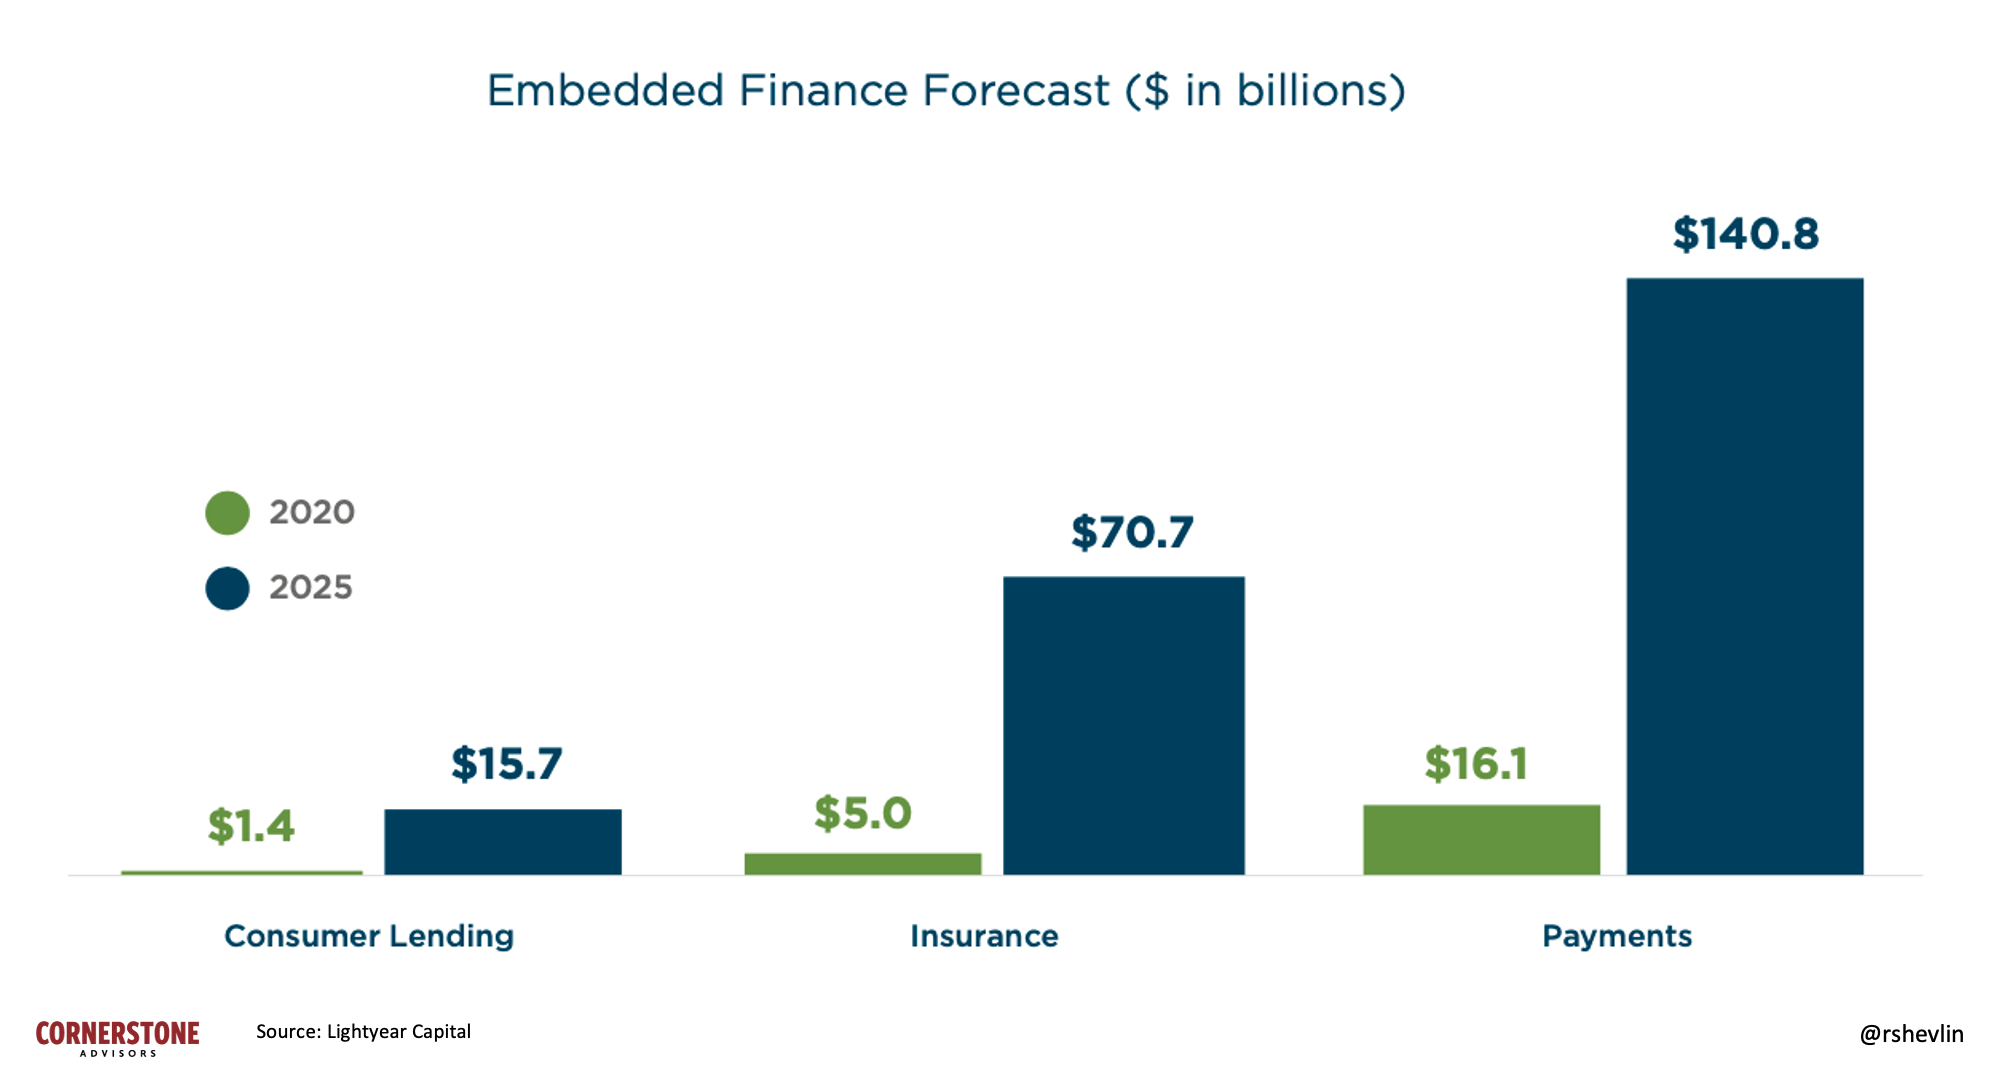 Embedded Finance & Banking statistics & forecasts for 2020-25.